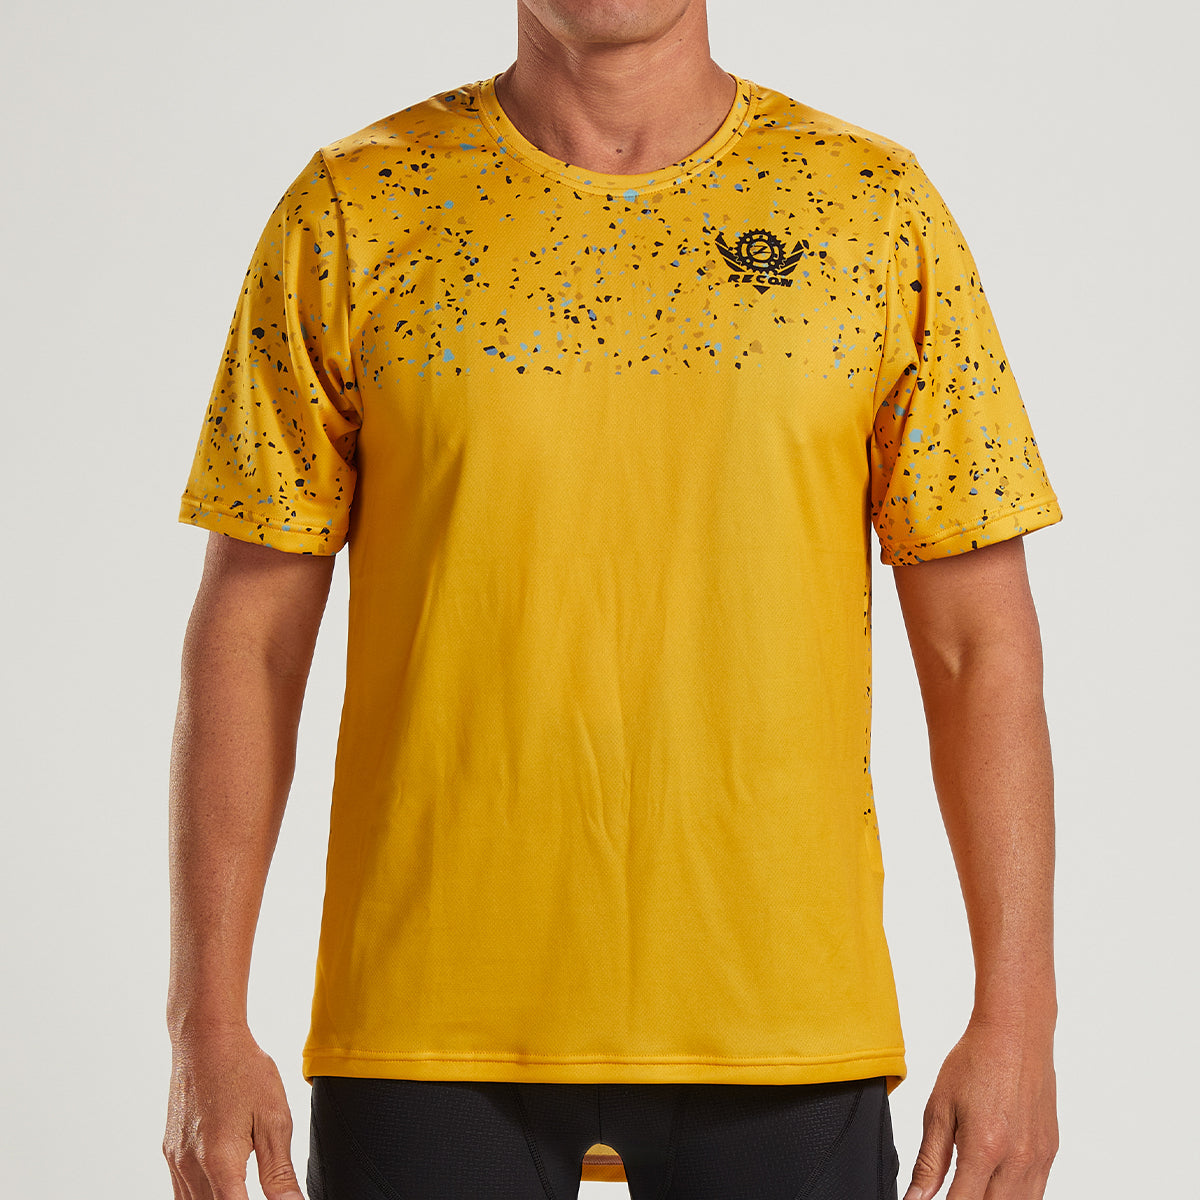 Zoot Sports Mens Recon Cycle Enduro Jersey - Sulfur